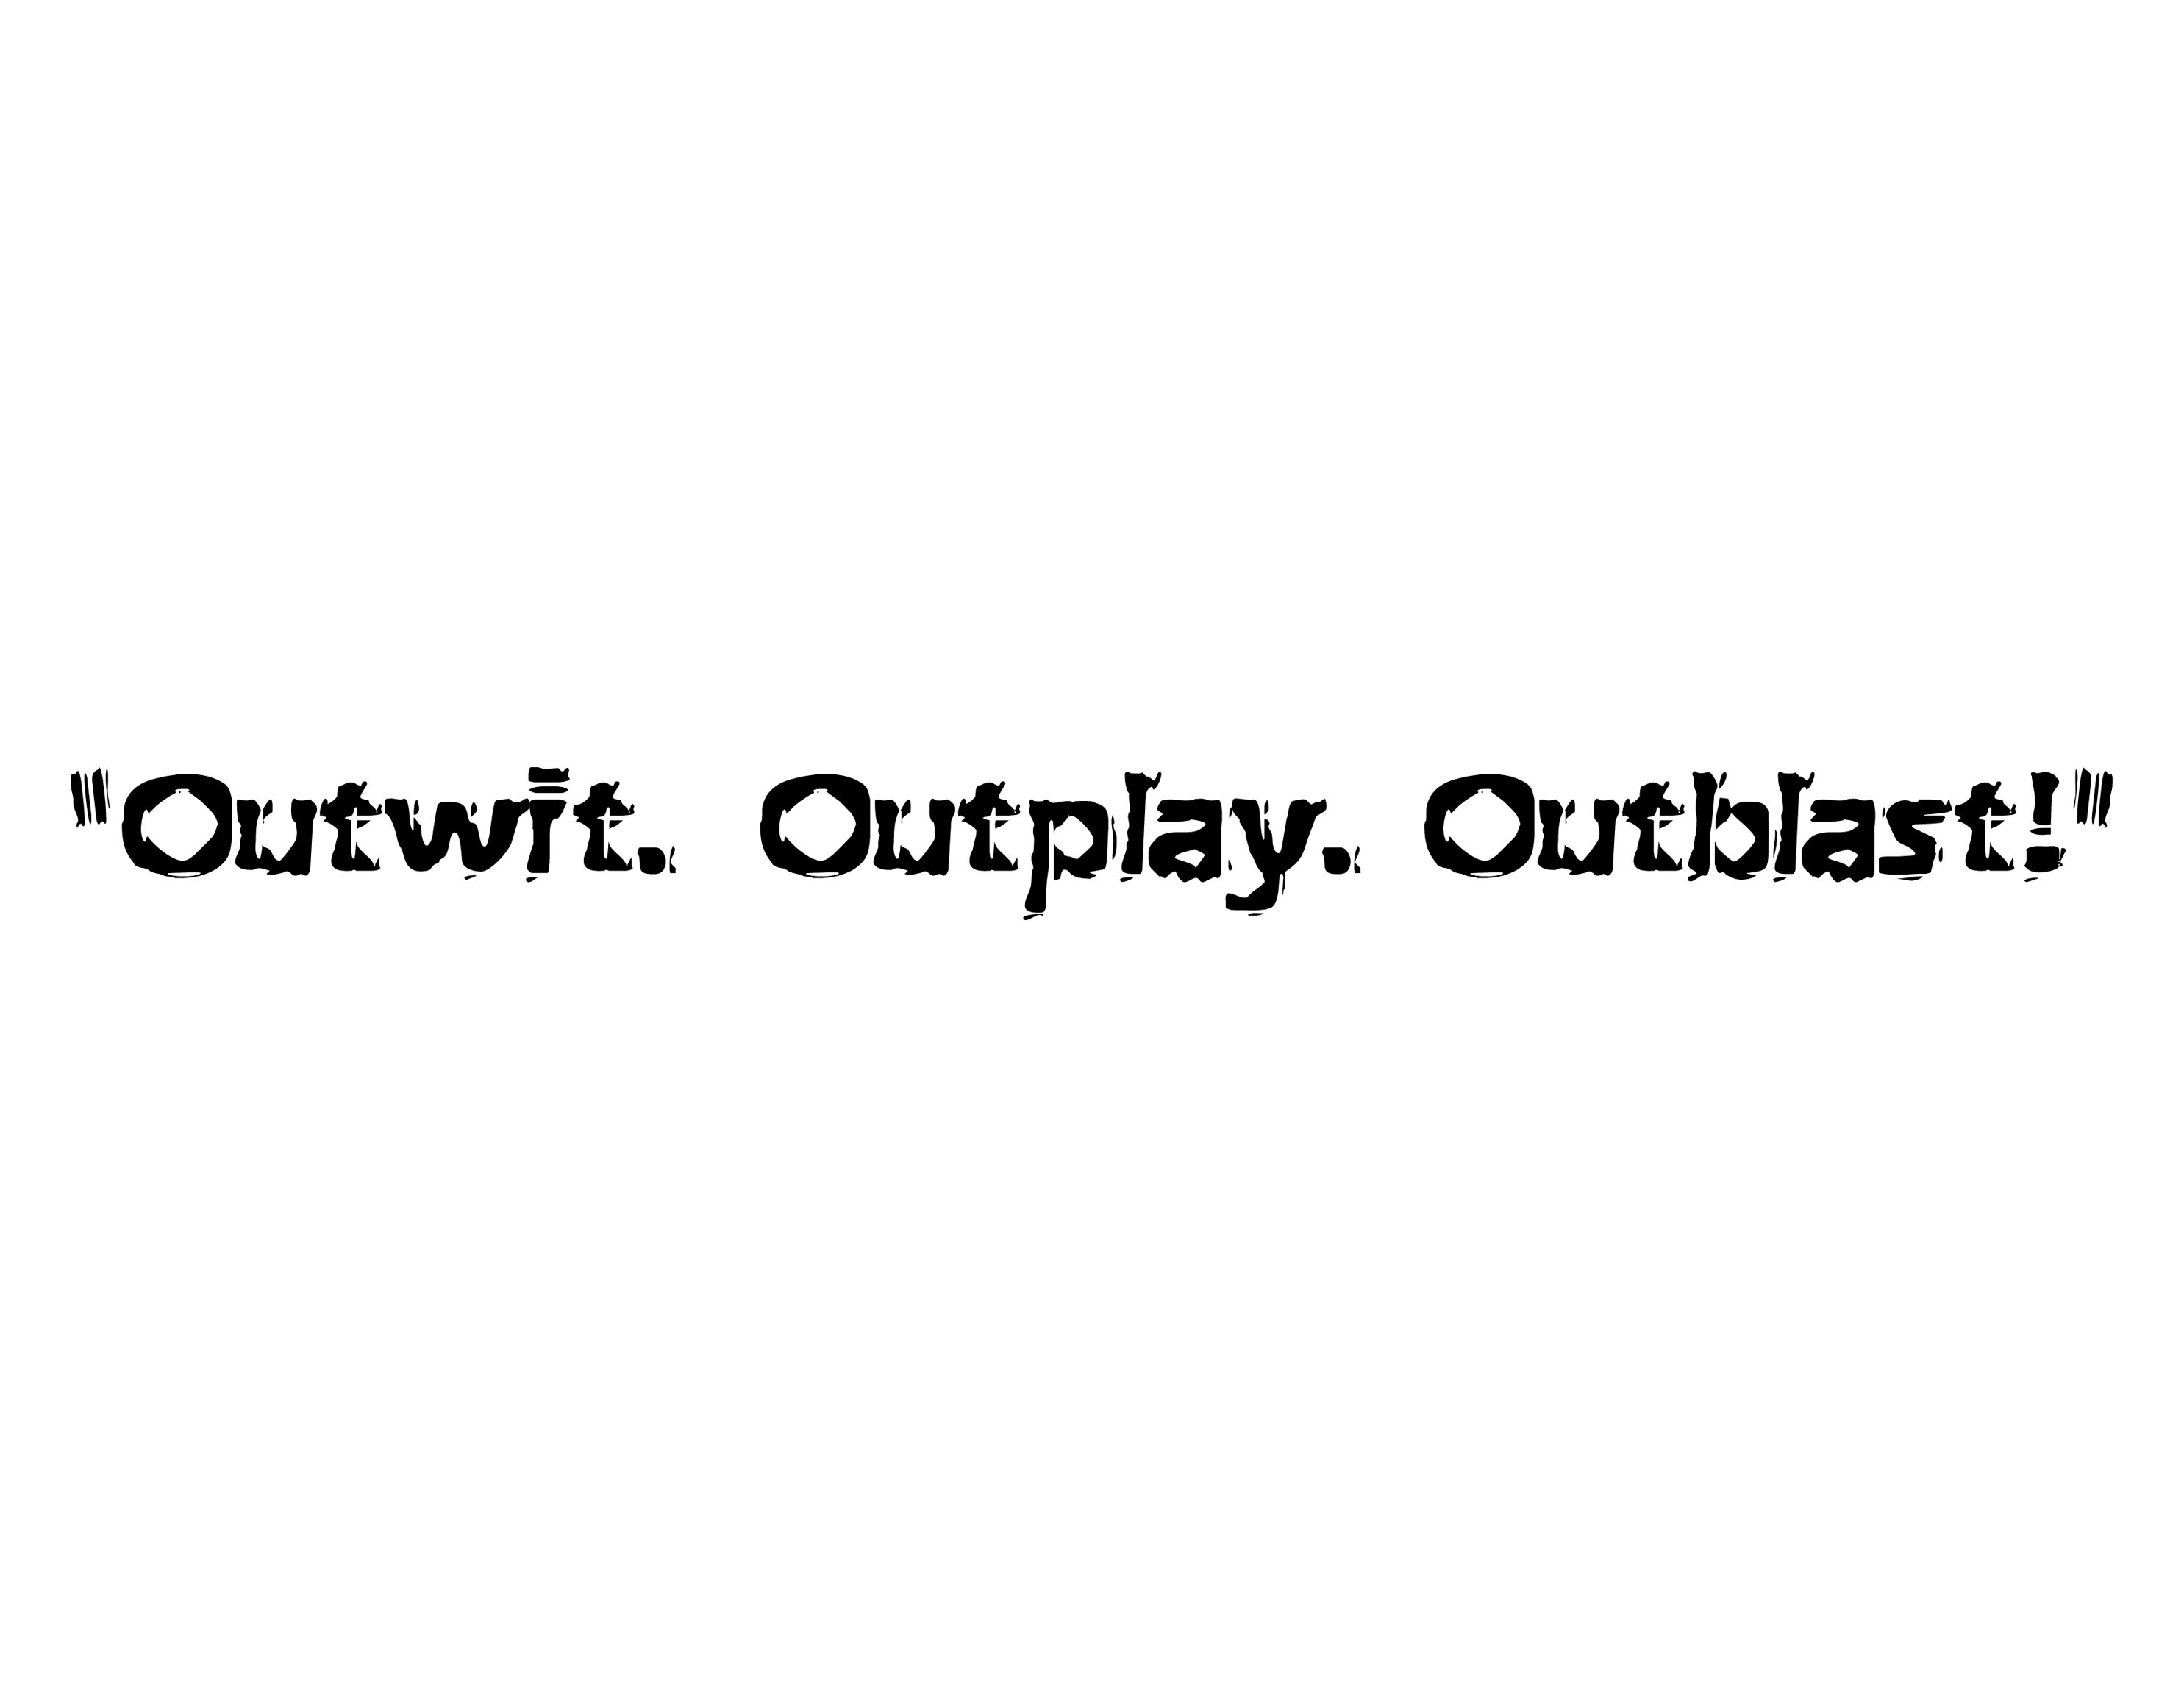  "OUTWIT. OUTPLAY. OUTBLAST!"